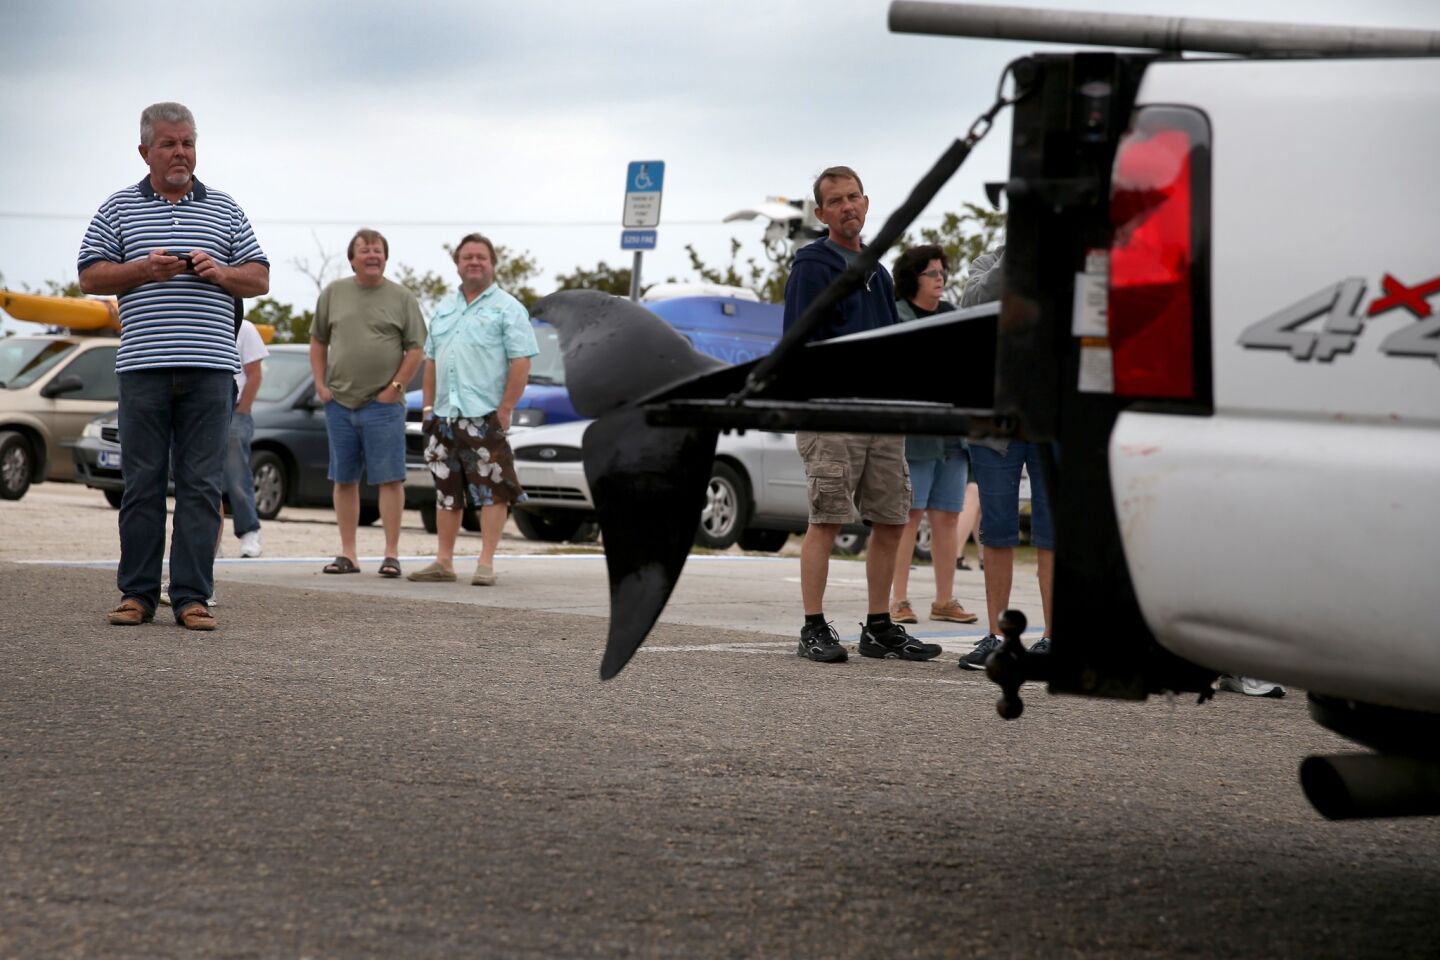 People watch as a dead pilot whale is transported to a facility for a necropsy by the National Oceanic and Atmospheric Administration's Fisheries Service on January 21, 2014 in Estero, Florida.